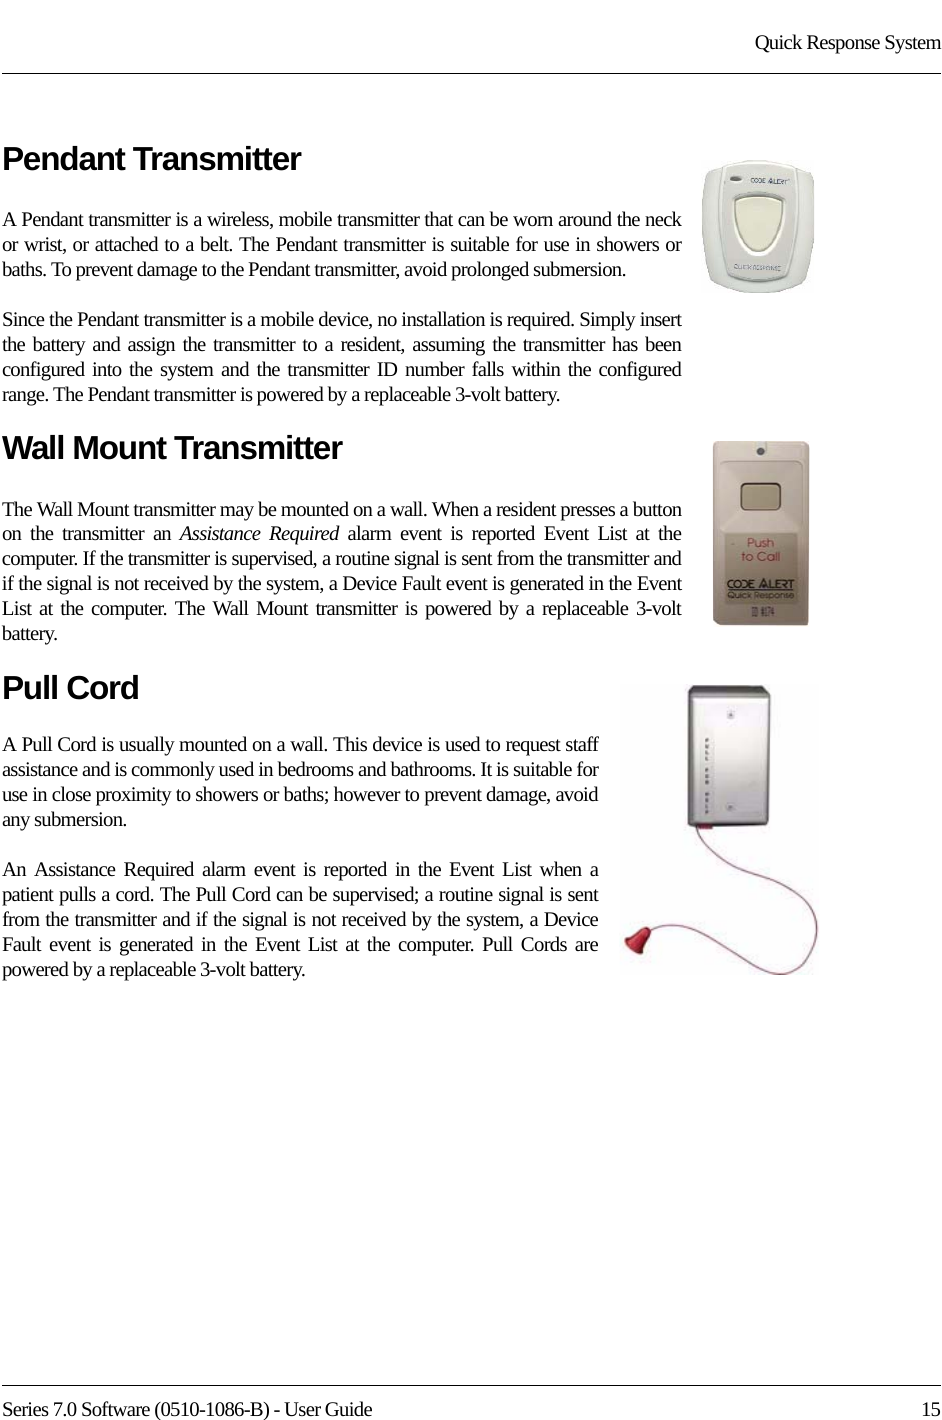 Series 7.0 Software (0510-1086-B) - User Guide  15Quick Response SystemPendant TransmitterA Pendant transmitter is a wireless, mobile transmitter that can be worn around the neck or wrist, or attached to a belt. The Pendant transmitter is suitable for use in showers or baths. To prevent damage to the Pendant transmitter, avoid prolonged submersion. Since the Pendant transmitter is a mobile device, no installation is required. Simply insert the battery and assign the transmitter to a resident, assuming the transmitter has been configured into the system and the transmitter ID number falls within the configured range. The Pendant transmitter is powered by a replaceable 3-volt battery. Wall Mount TransmitterThe Wall Mount transmitter may be mounted on a wall. When a resident presses a button on the transmitter an Assistance Required alarm event is reported Event List at the computer. If the transmitter is supervised, a routine signal is sent from the transmitter and if the signal is not received by the system, a Device Fault event is generated in the Event List at the computer. The Wall Mount transmitter is powered by a replaceable 3-volt battery. Pull CordA Pull Cord is usually mounted on a wall. This device is used to request staff assistance and is commonly used in bedrooms and bathrooms. It is suitable for use in close proximity to showers or baths; however to prevent damage, avoid any submersion.An Assistance Required alarm event is reported in the Event List when a patient pulls a cord. The Pull Cord can be supervised; a routine signal is sent from the transmitter and if the signal is not received by the system, a Device Fault event is generated in the Event List at the computer. Pull Cords are powered by a replaceable 3-volt battery. 